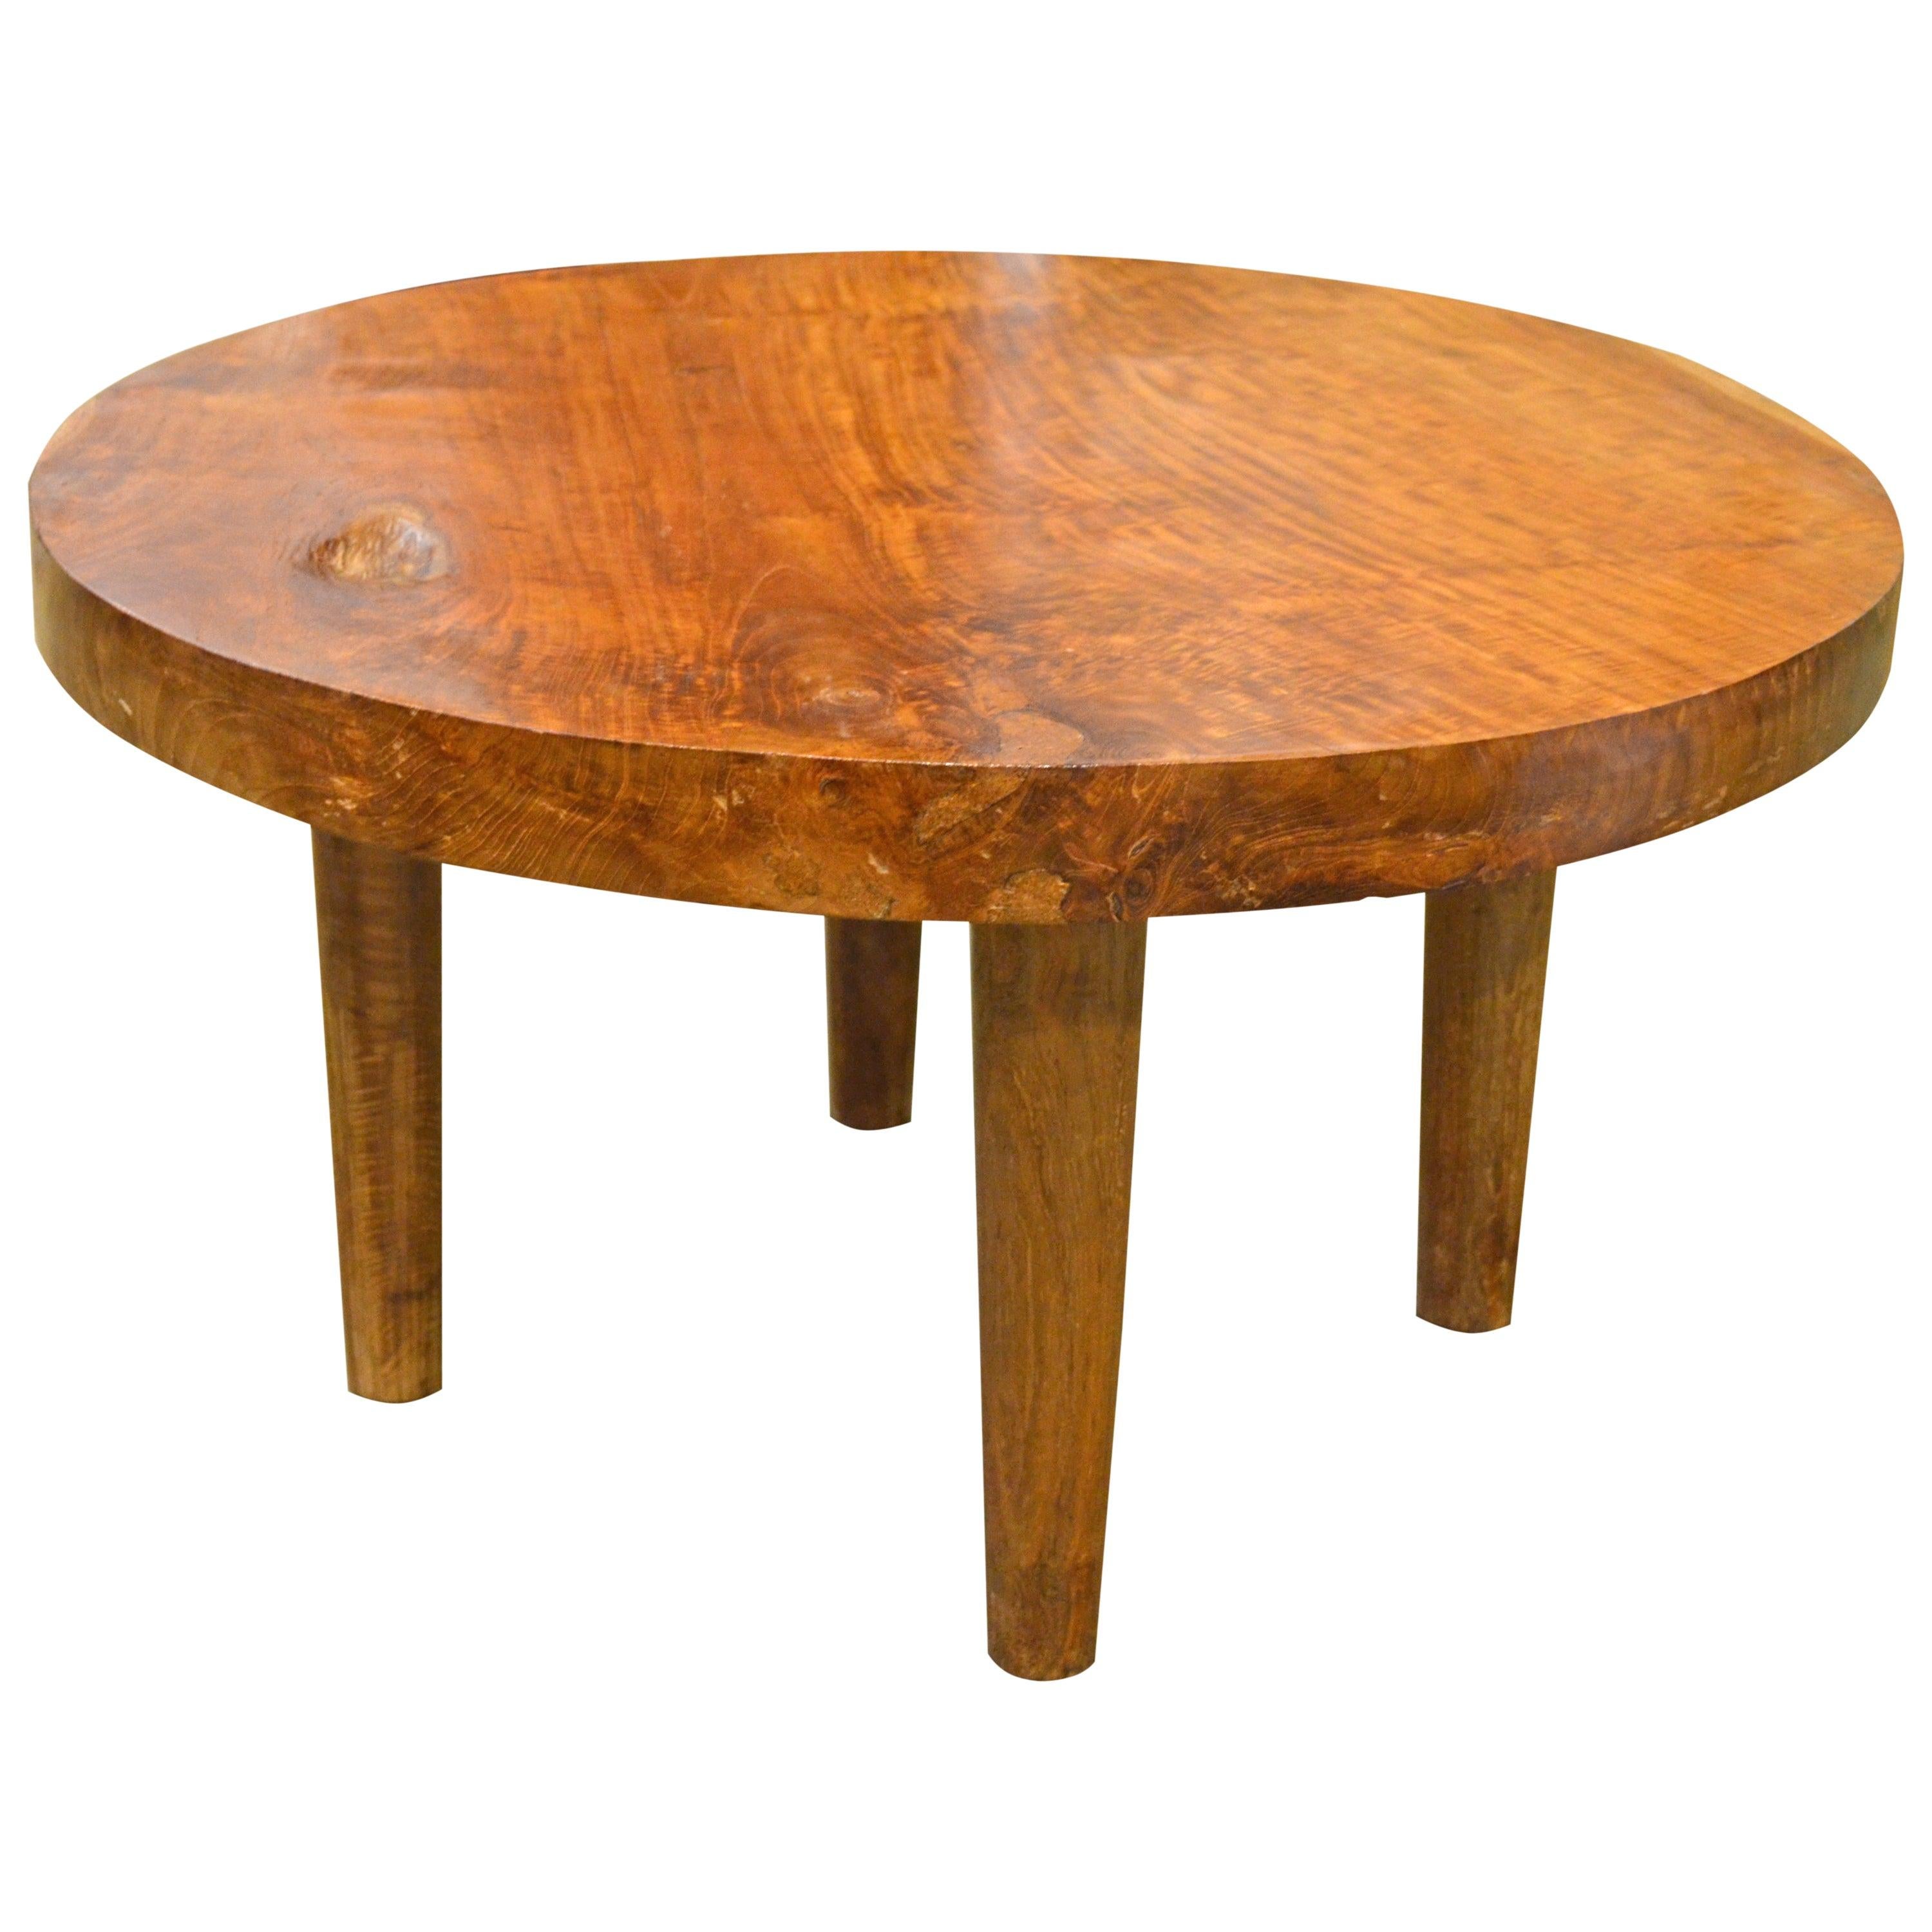 Single slab reclaimed teak, coffee or side table with a natural oil finish. Floating on mid century style legs.

Own an Andrianna Shamaris original. 

Andrianna Shamaris. The Leader In Modern Organic Design.